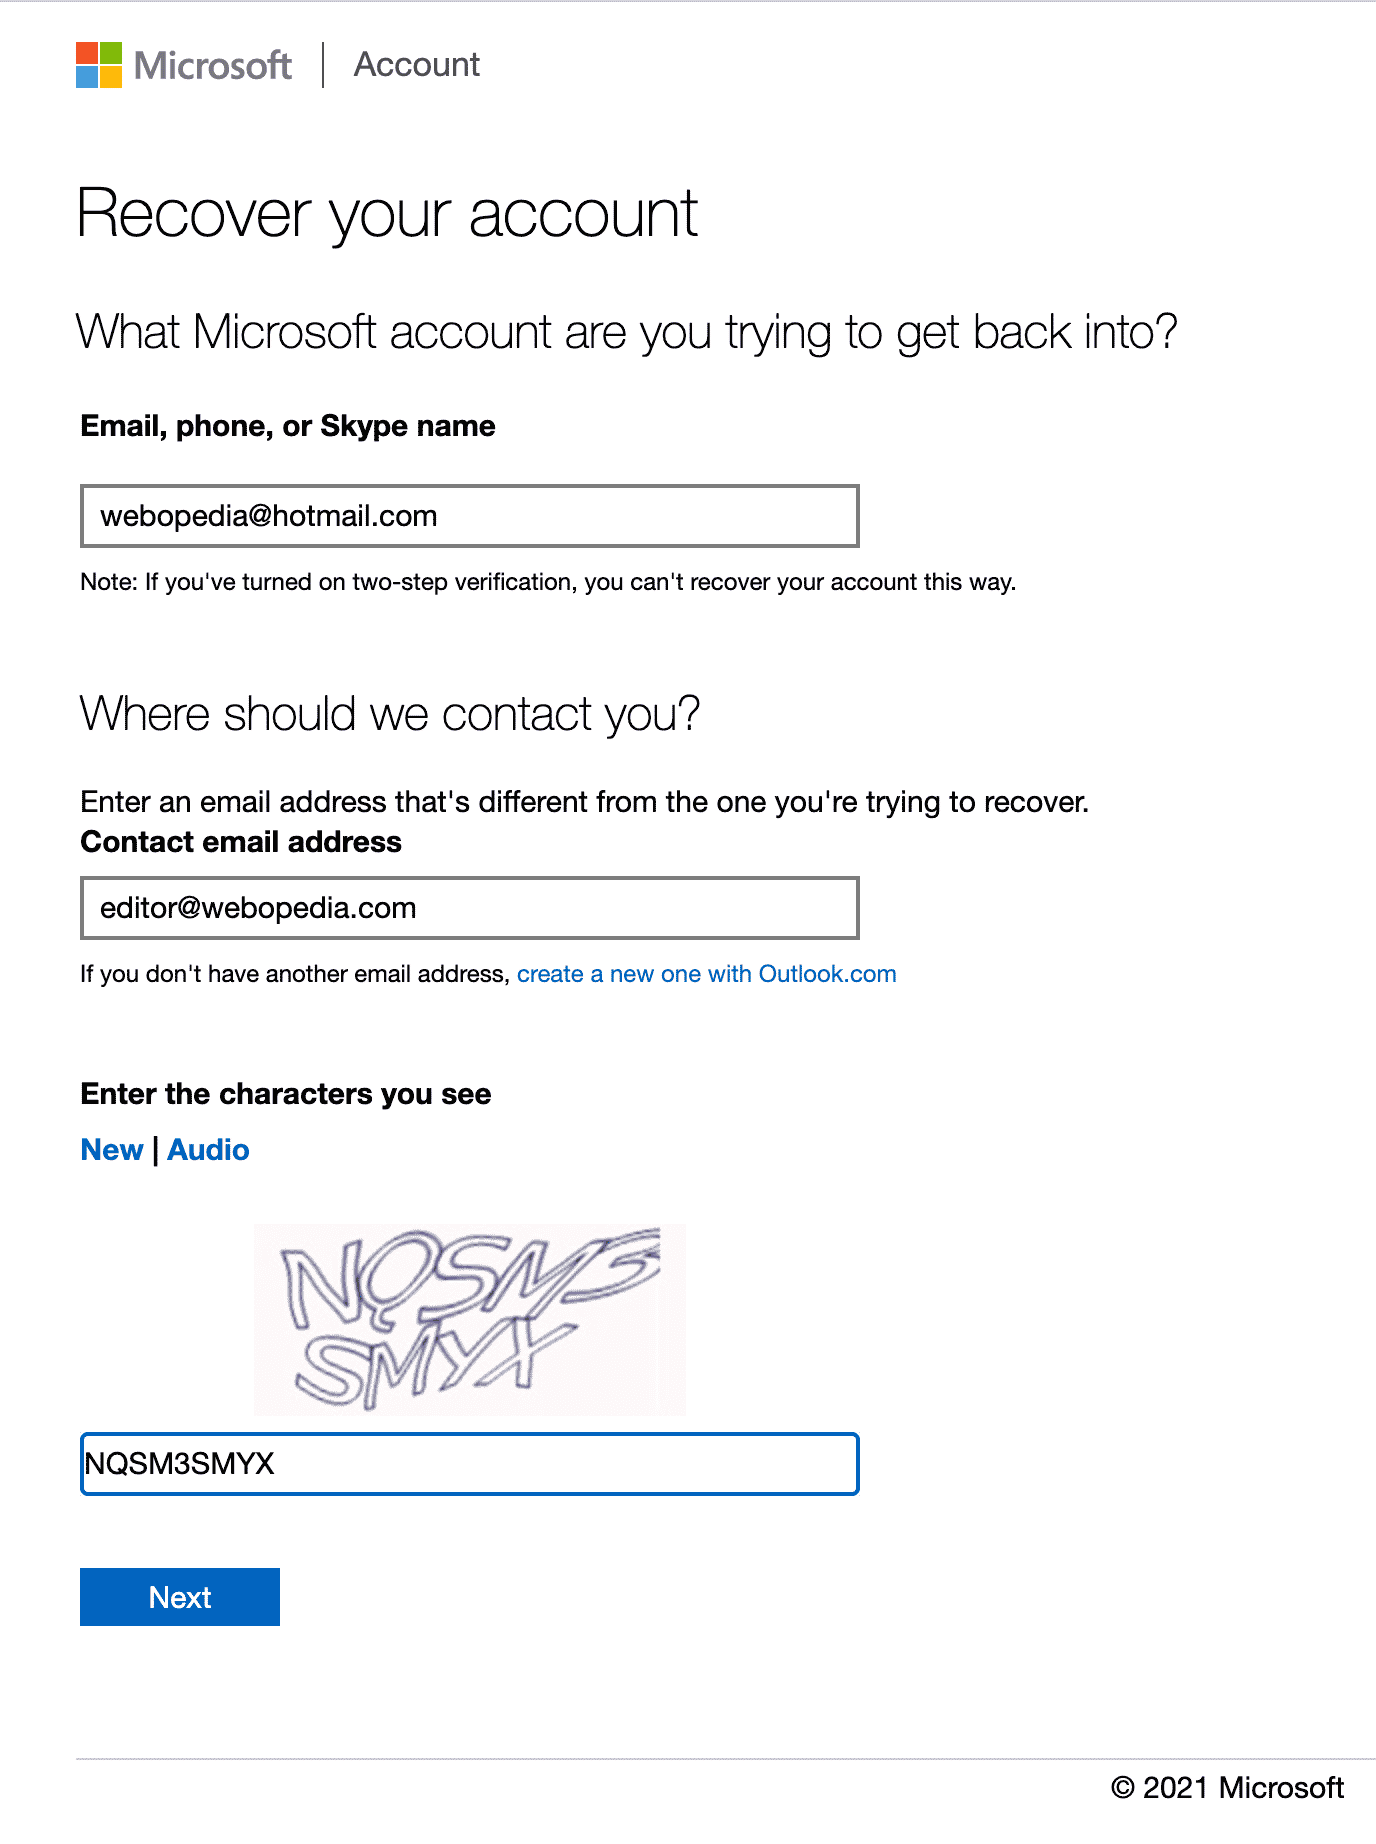 Hotmail account recovery screen.